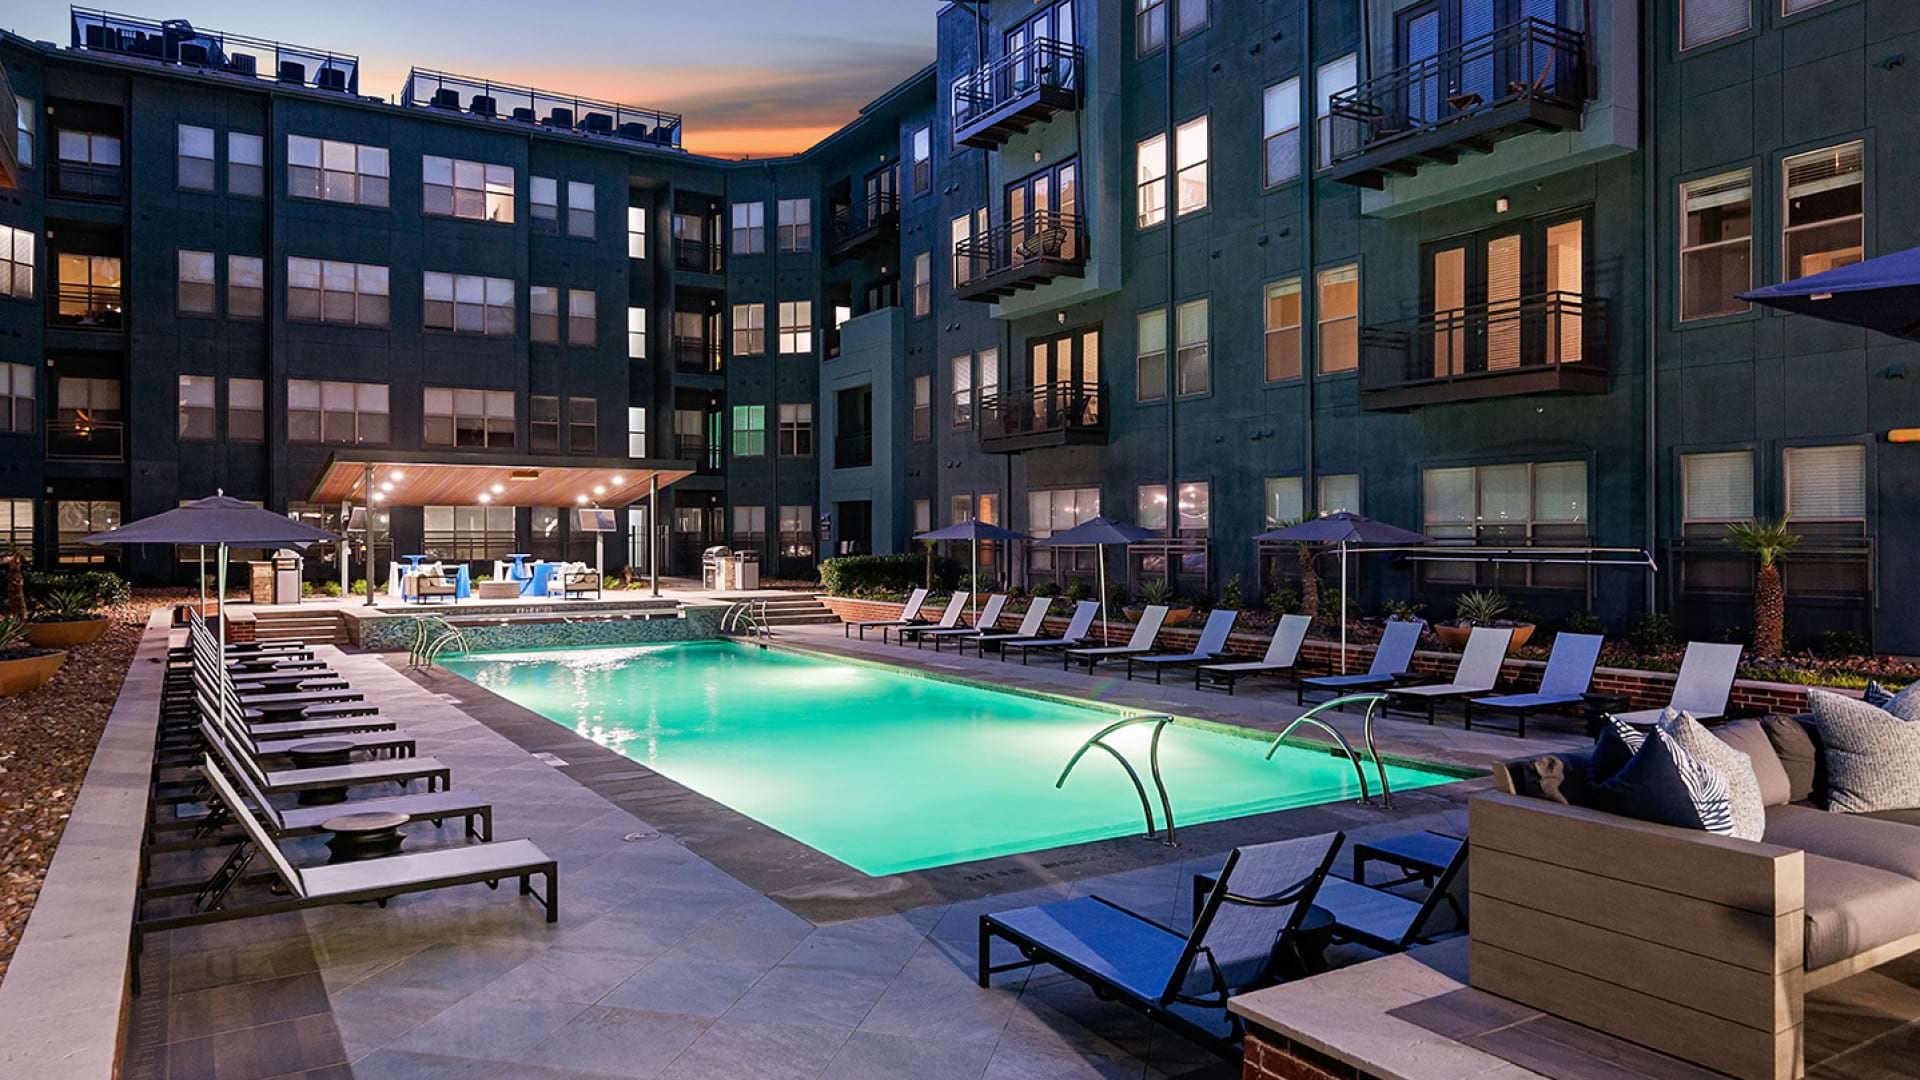 Farmers Branch apartments with swimming pool